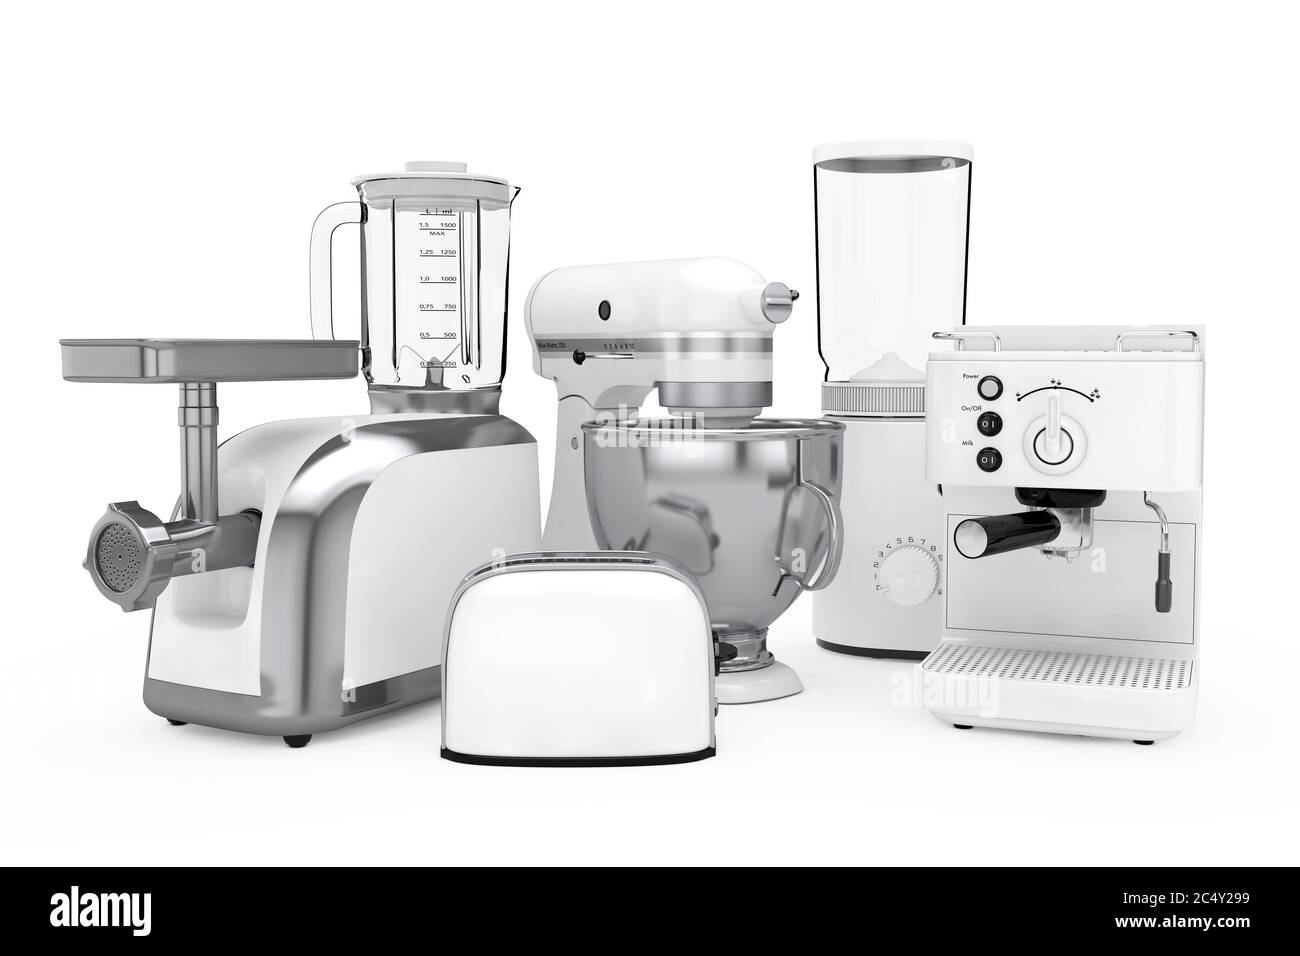 https://c8.alamy.com/comp/2C4Y299/kitchen-appliances-set-white-blender-toaster-coffee-machine-meat-ginder-food-mixer-and-coffee-grinder-on-a-white-background-3d-rendering-2C4Y299.jpg